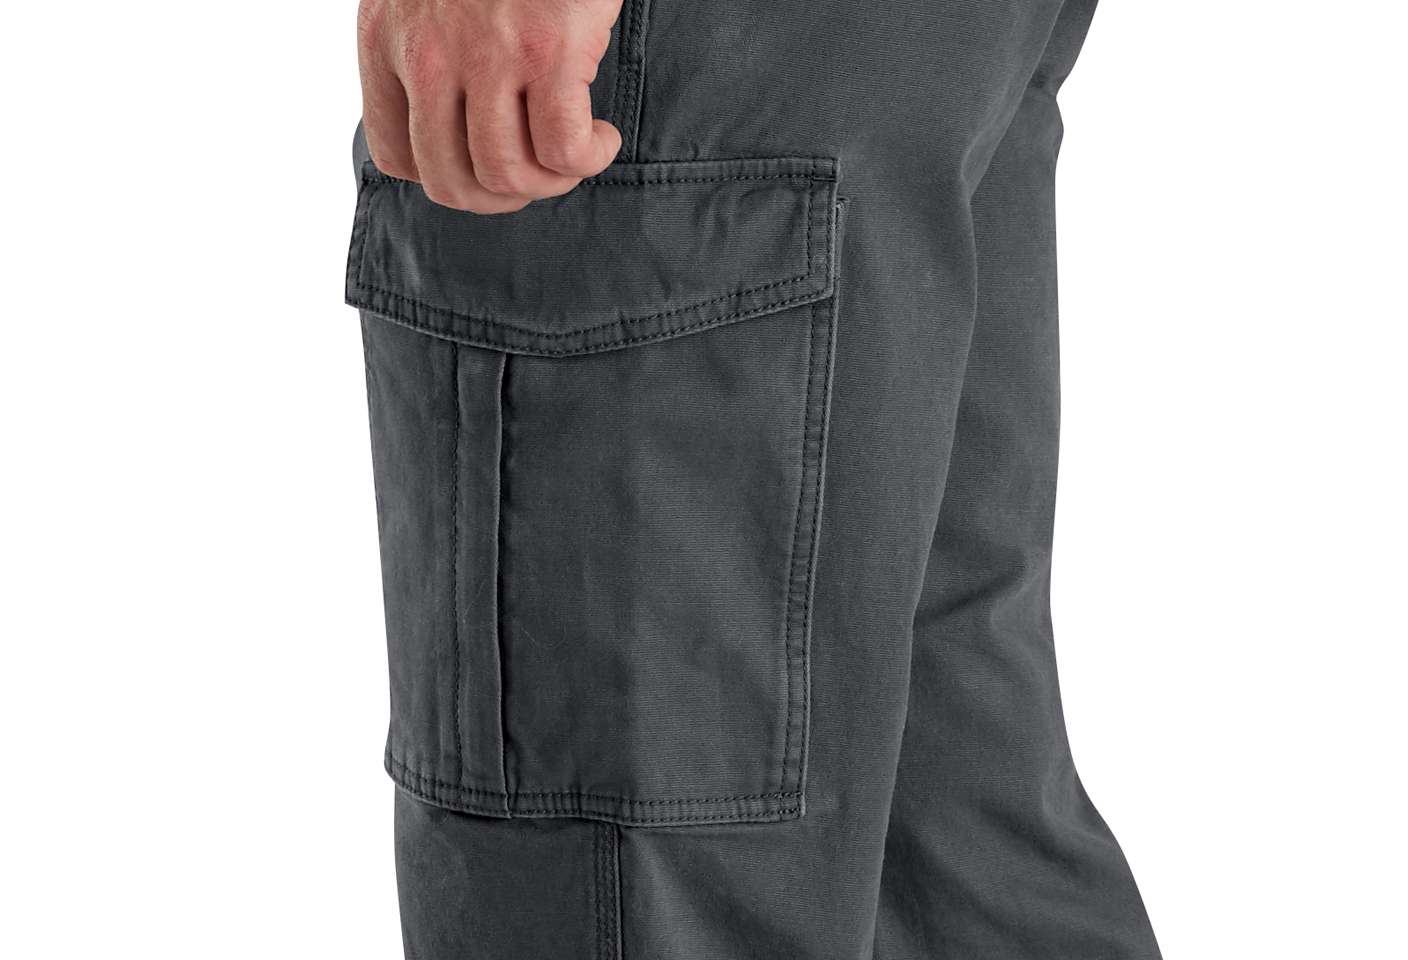 Utility and cargo pockets hold small tools